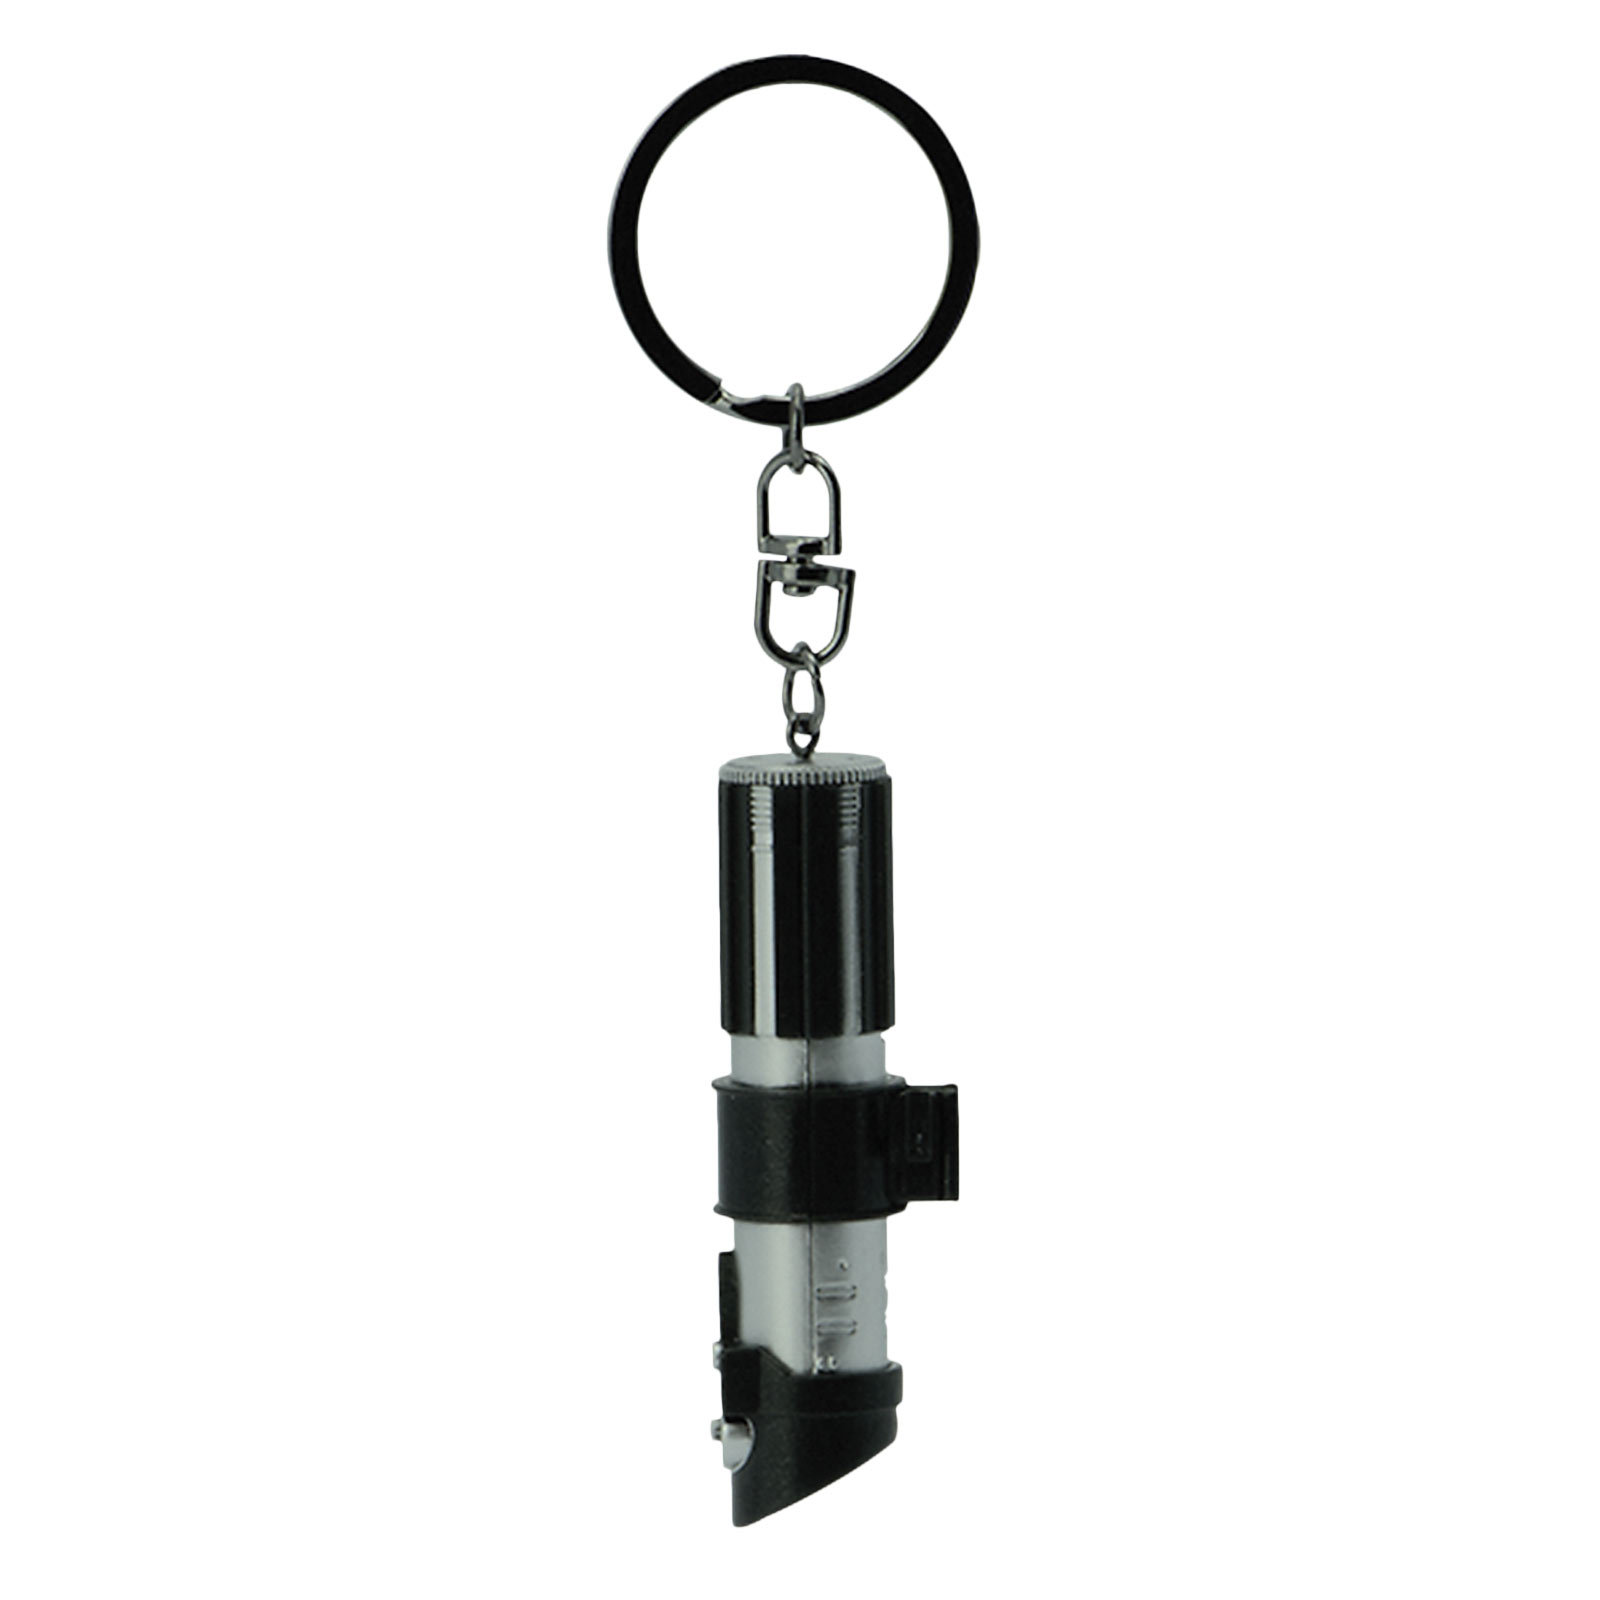 Darth Vader Lightsaber Keychain with Light and Sound - Star Wars